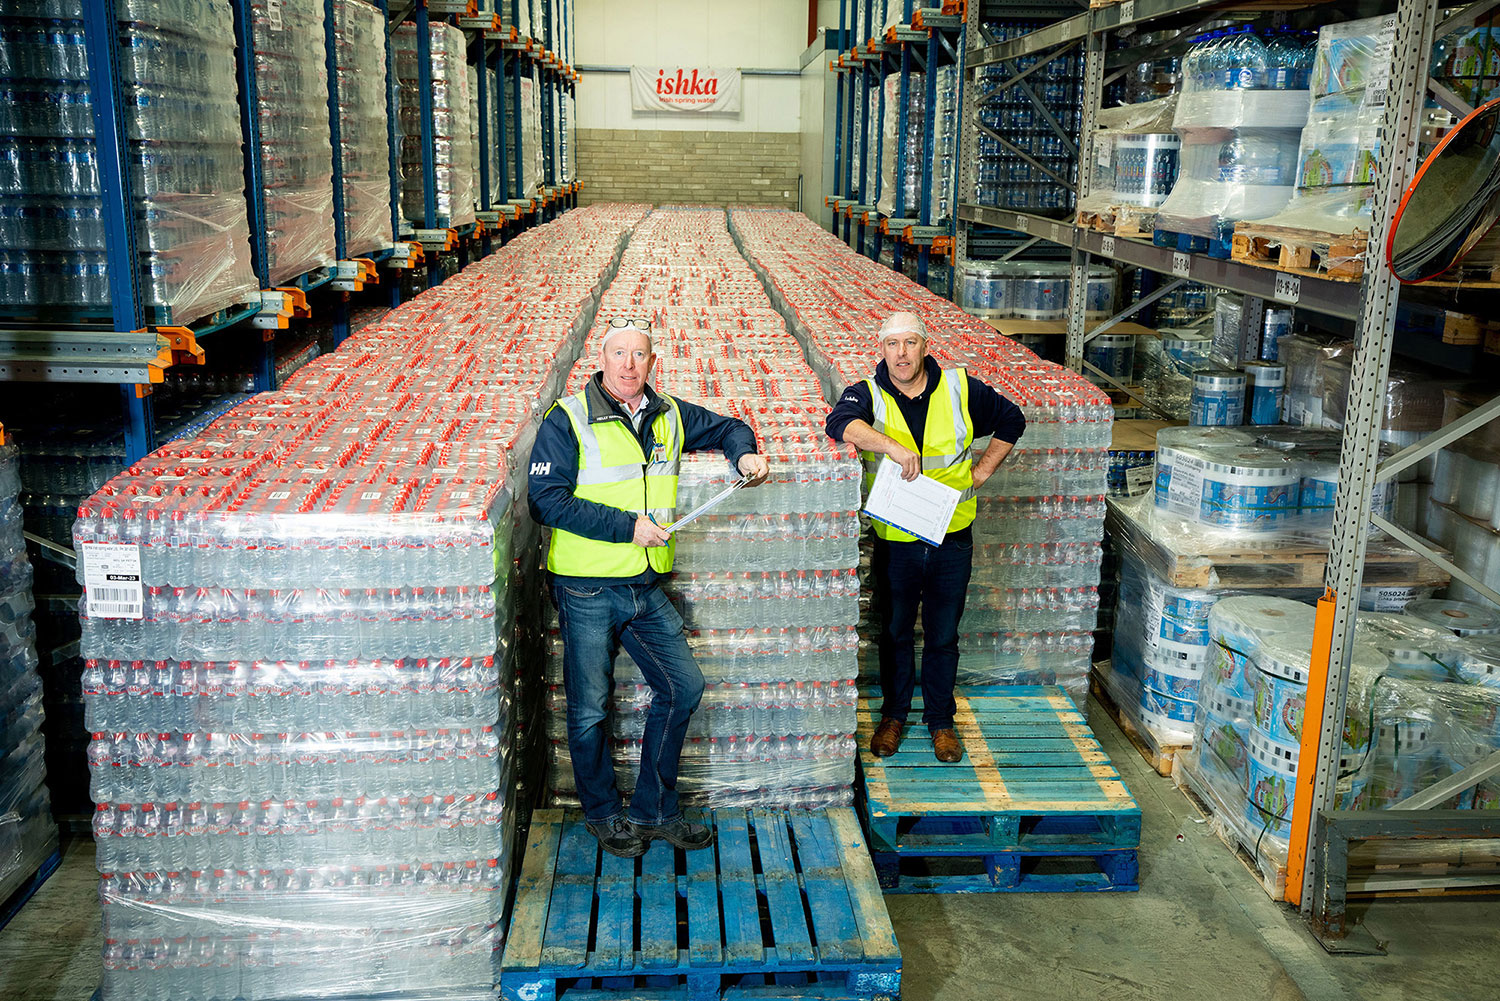 County Limerick-based bottled water company ISHKA Irish Spring Water is delighted to be named the official hydration partner to the Irish Life Dublin Marathon and Race Series.